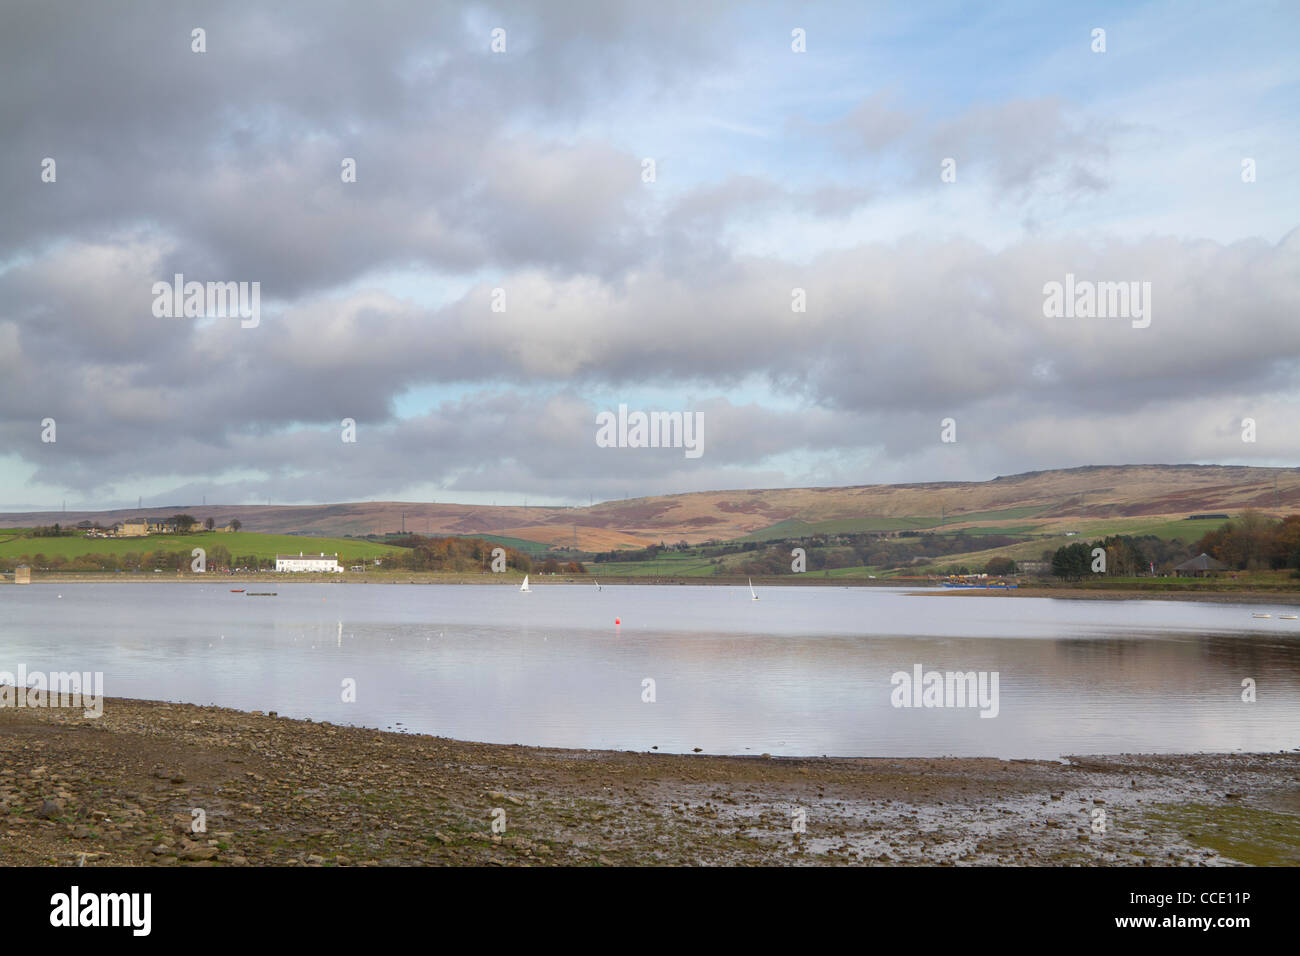 Hollingworth Lake On the outskirts of Littleborough, Hollingworth Lake was built in 1804 to supply water to the Rochdale canal. Stock Photo